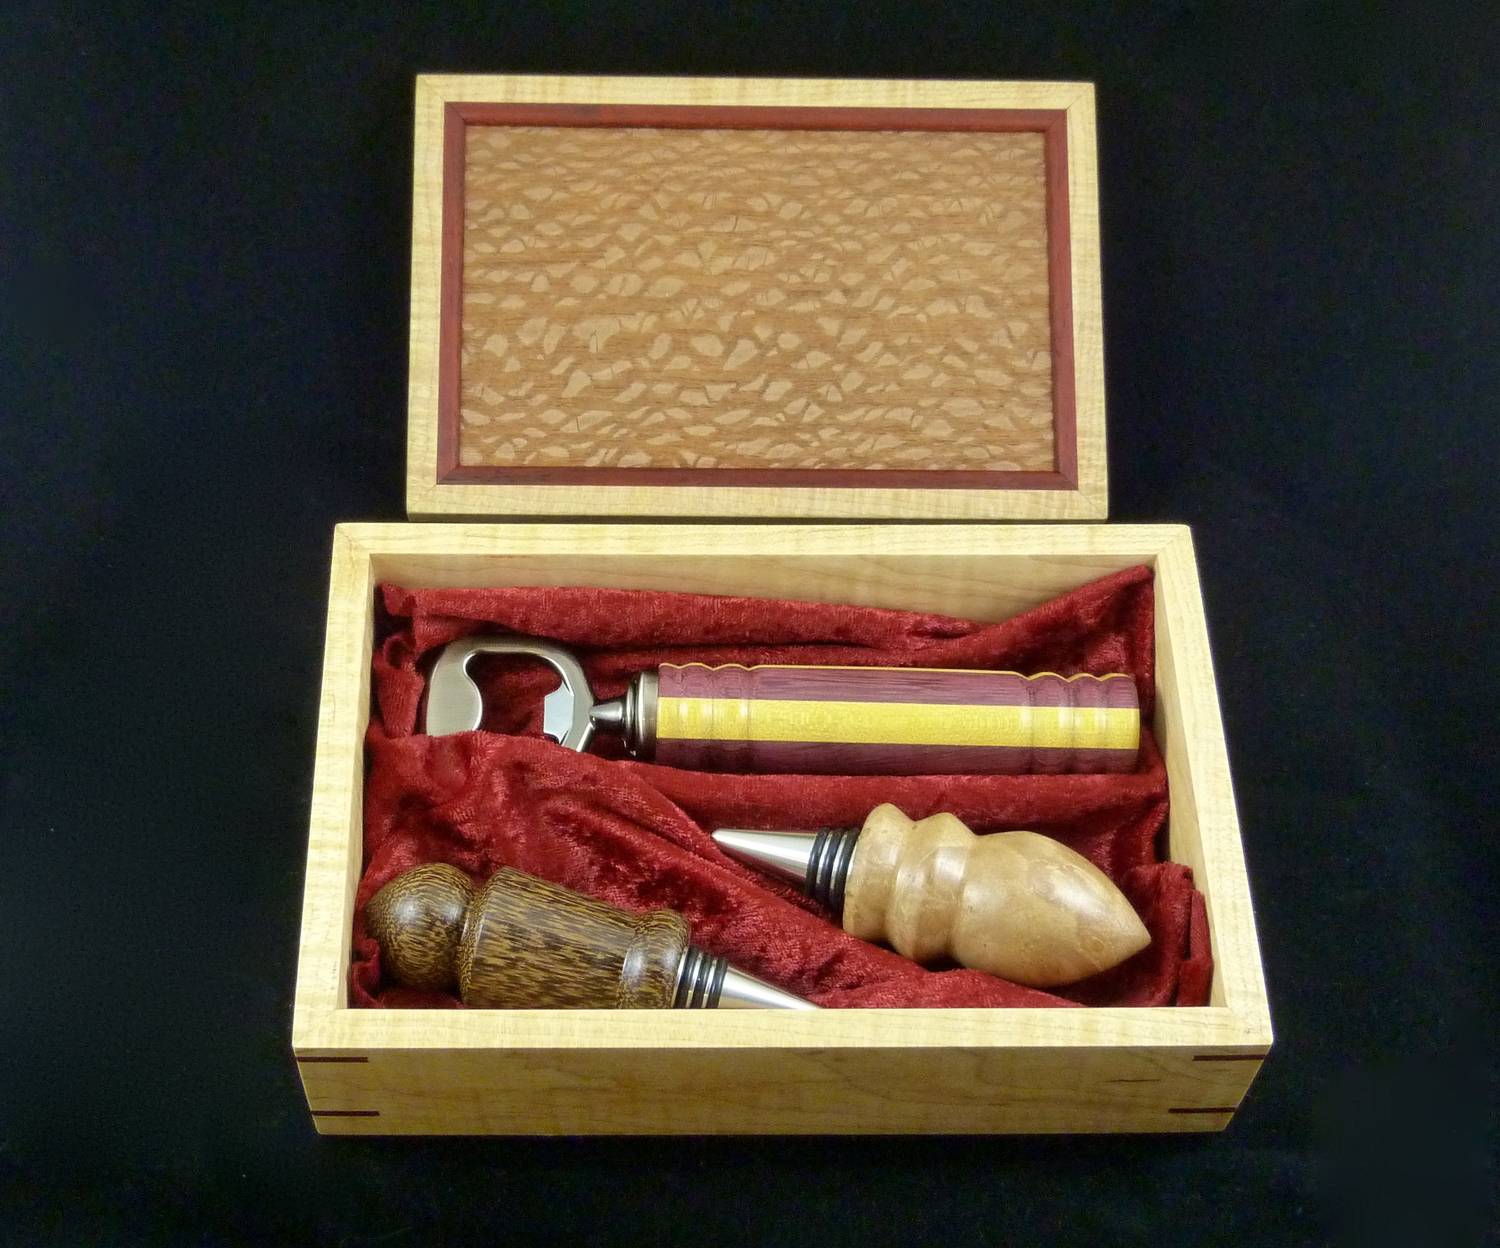 Opener, stoppers, and presentation box